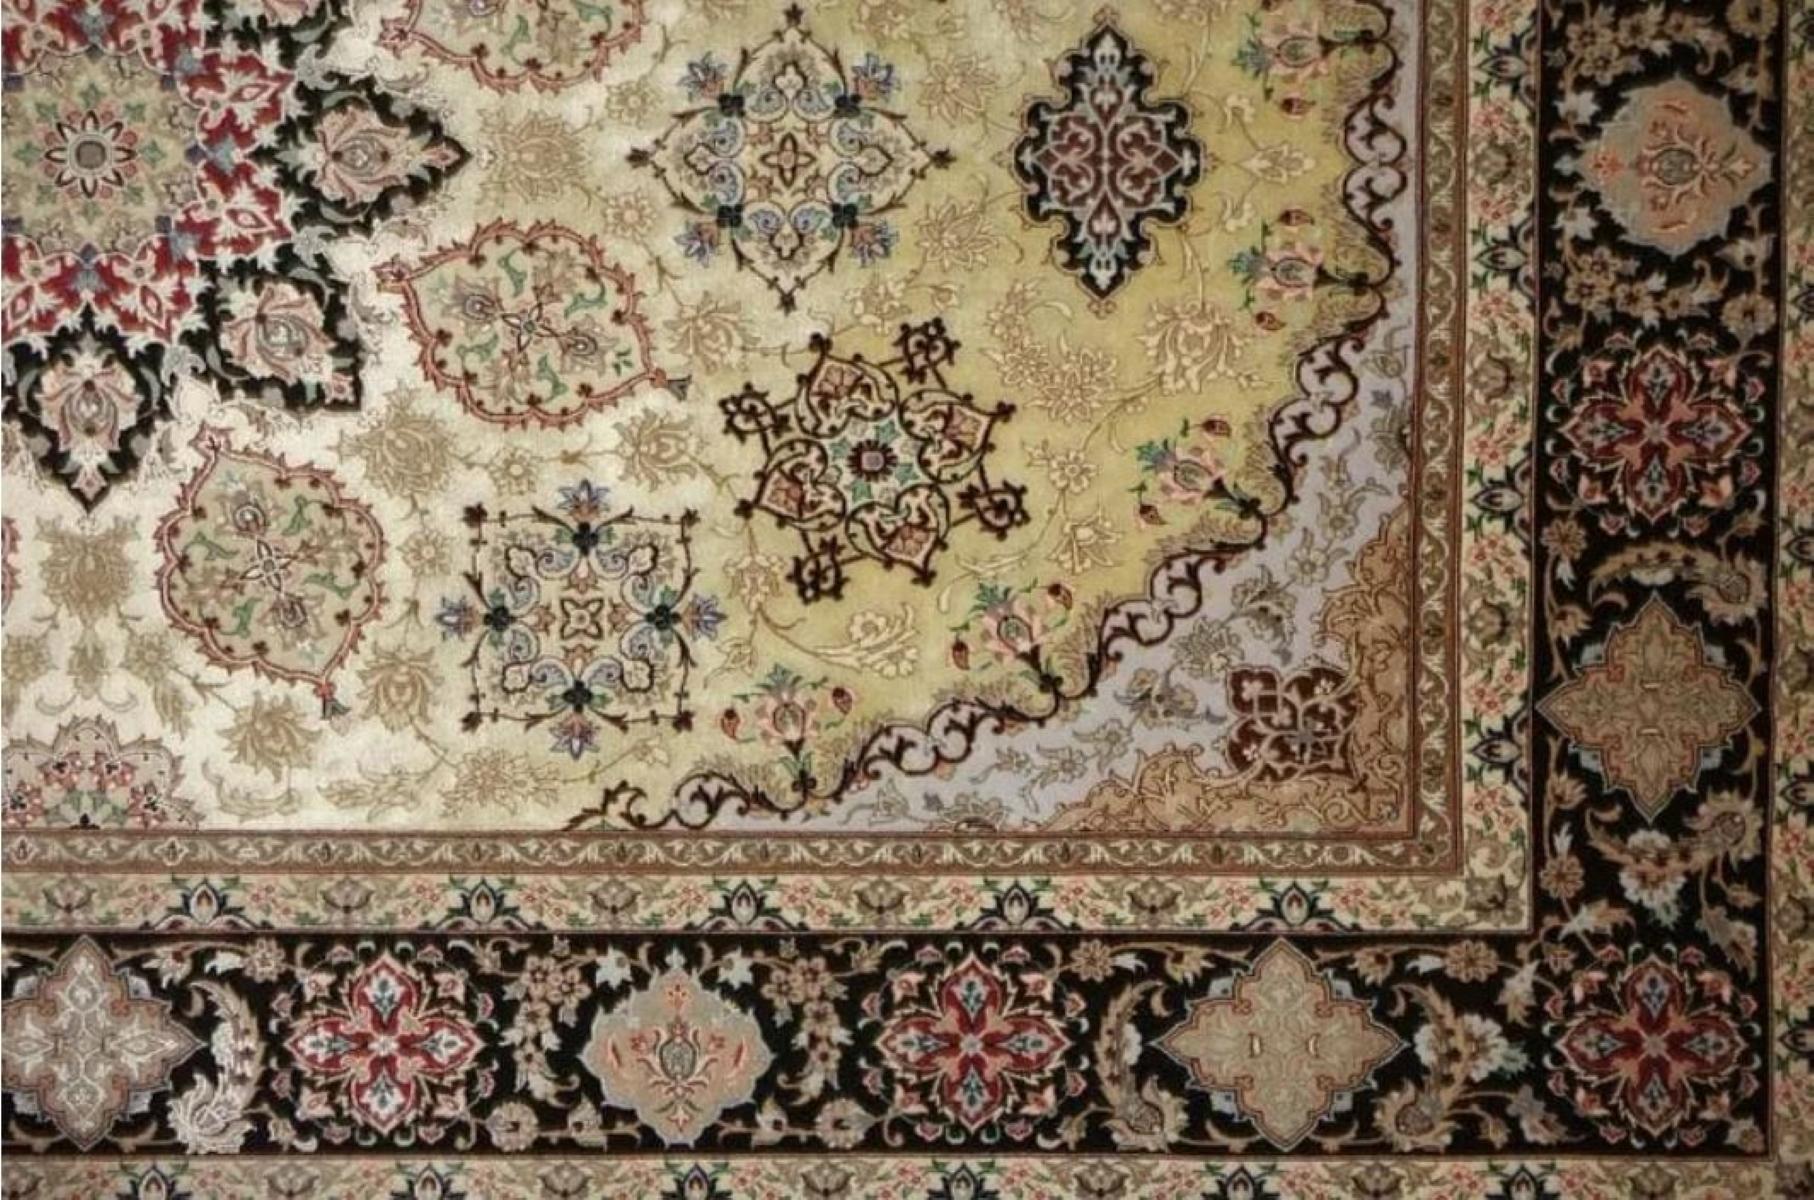 Very fine Persian Rug Isfahan 600 Knots per inch, Size 7.8 x 5 Isfahan Iran Davari Wool and Silk with a Silk Foundation. Around 3,000,000 knots tied by hand one by one. It takes 2 years to complete this piece of art.